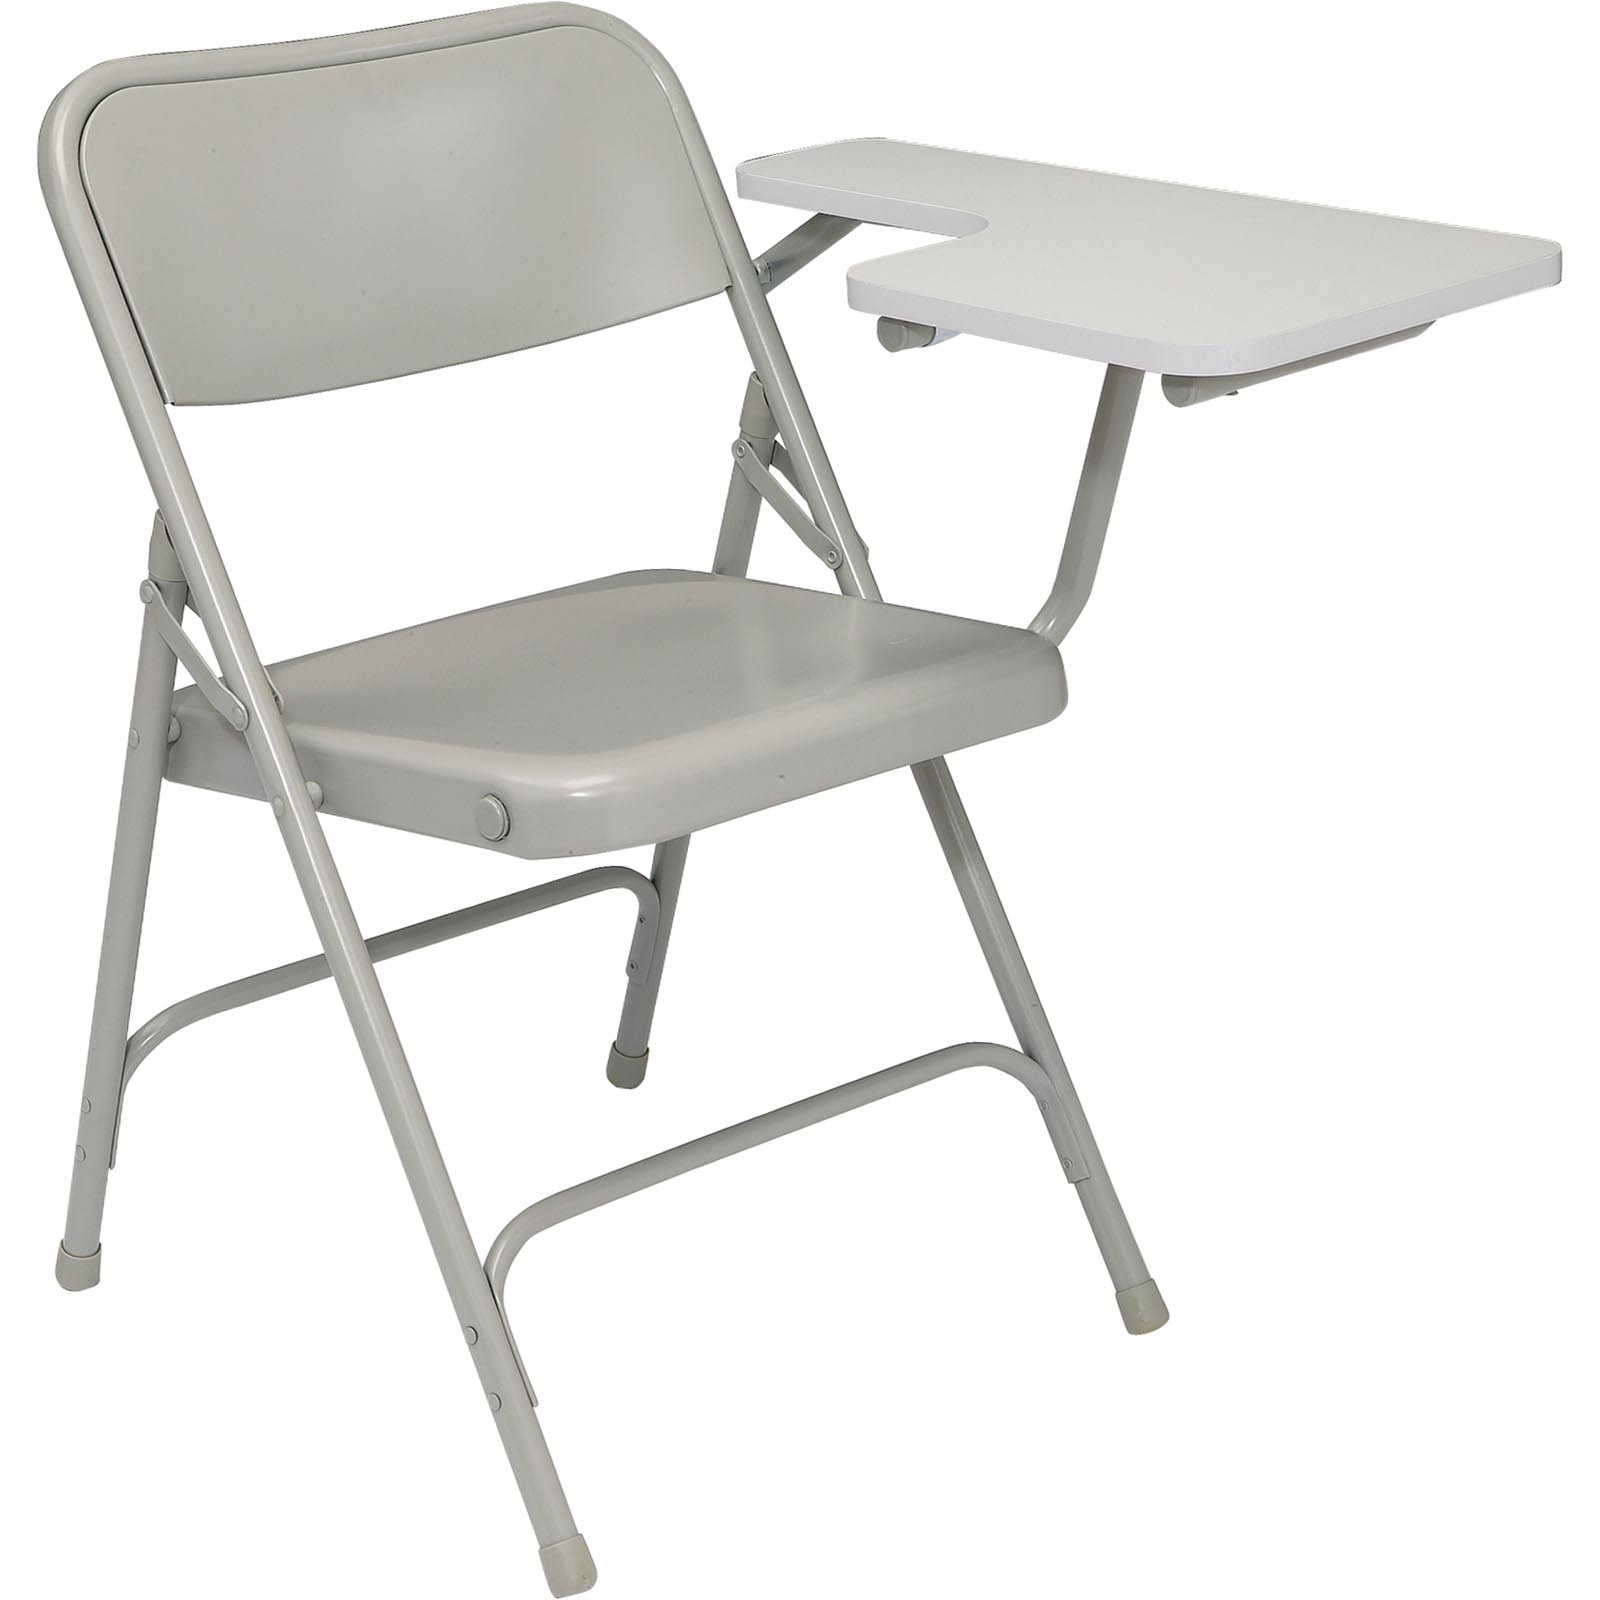 folding chair with table attached